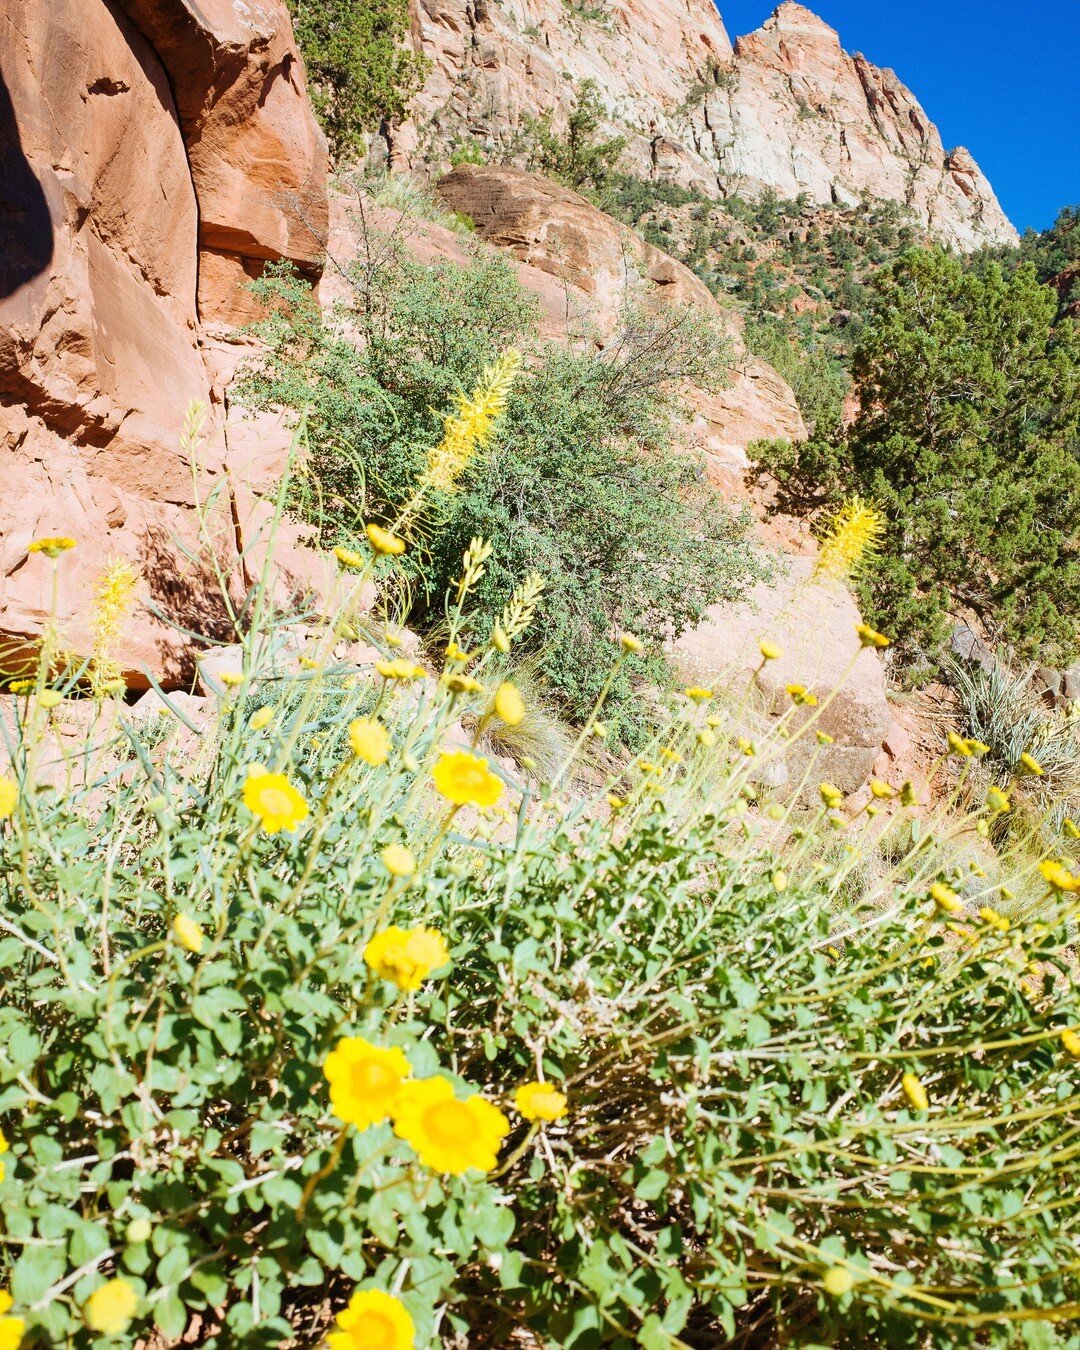 Itchin&rsquo; to go back out West ⛰⠀⠀⠀⠀⠀⠀⠀⠀⠀
⠀⠀⠀⠀⠀⠀⠀⠀⠀
One of my favorite parts about Utah were all the beautiful flowers 🌼 and 🌵